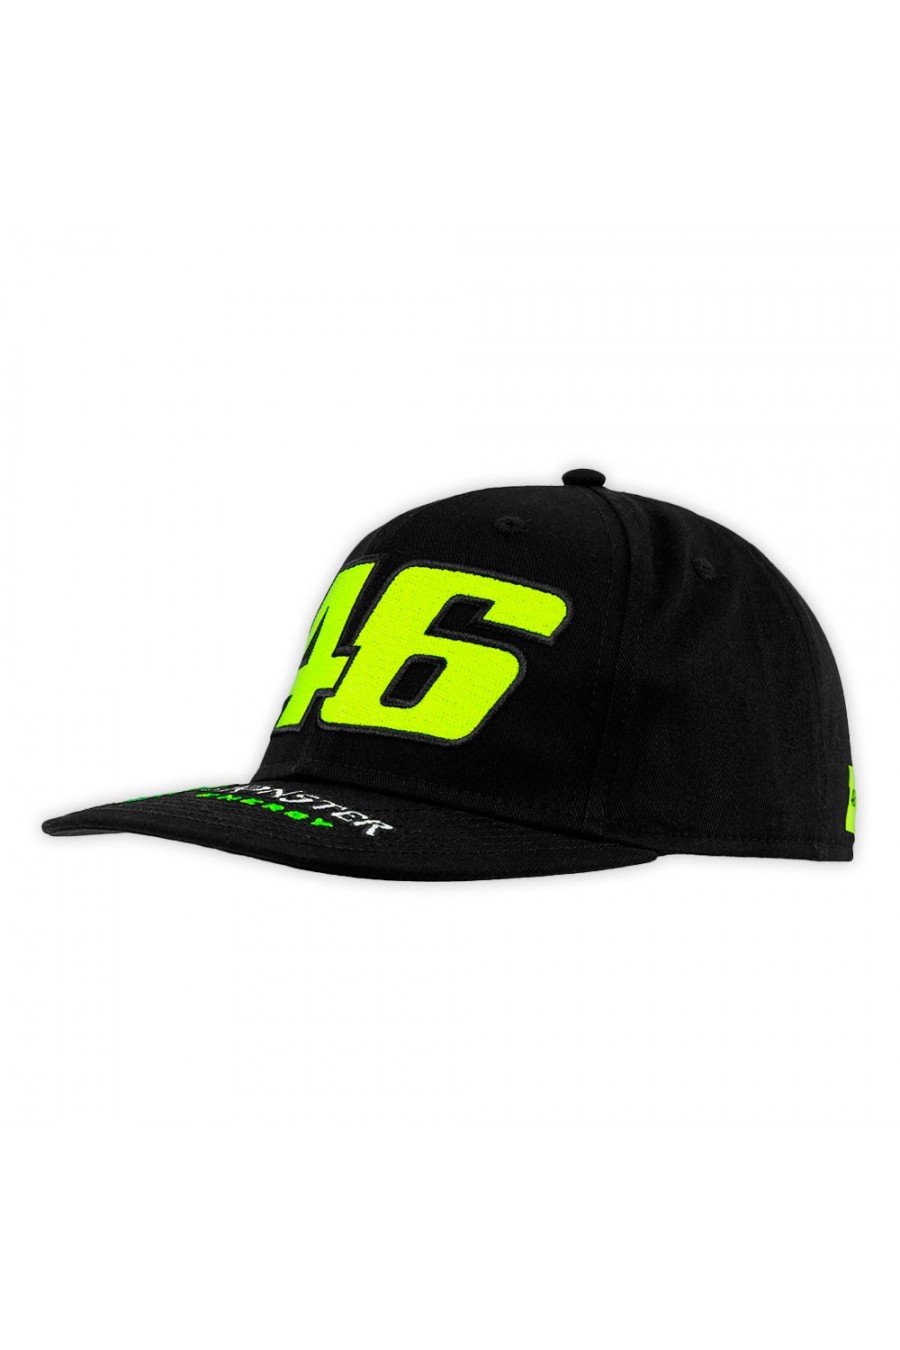 Buy Valentino 46 Dual Monster Cap. Available unisex